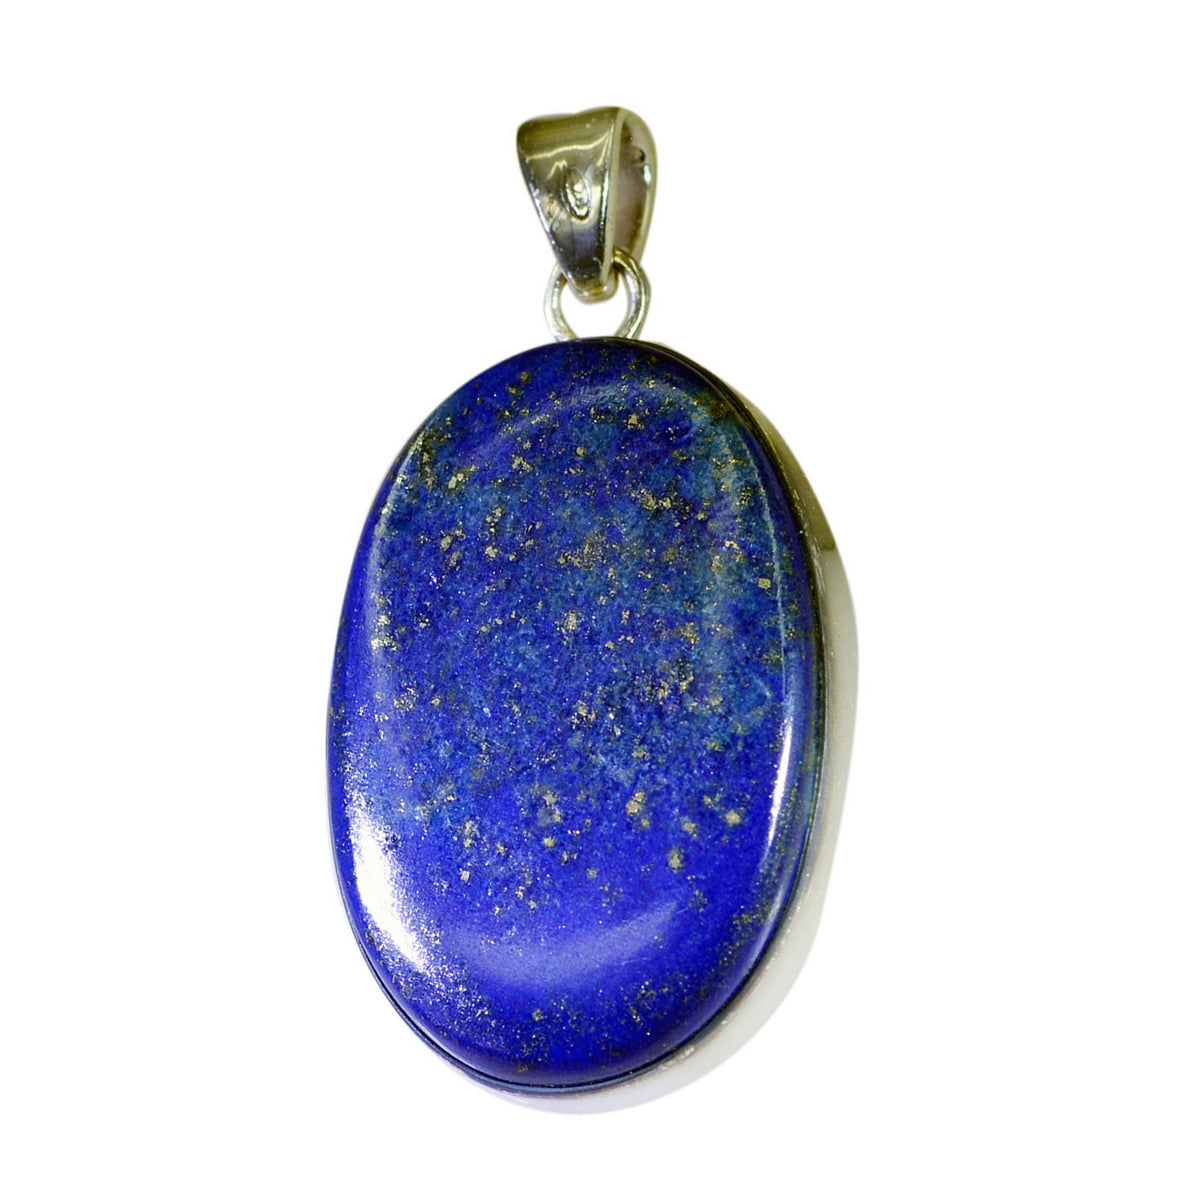 Riyo Irresistible Gems Oval Cabochon Nevy Blue Lapis Lazuli Solid Silver Pendant Gift For Anniversary